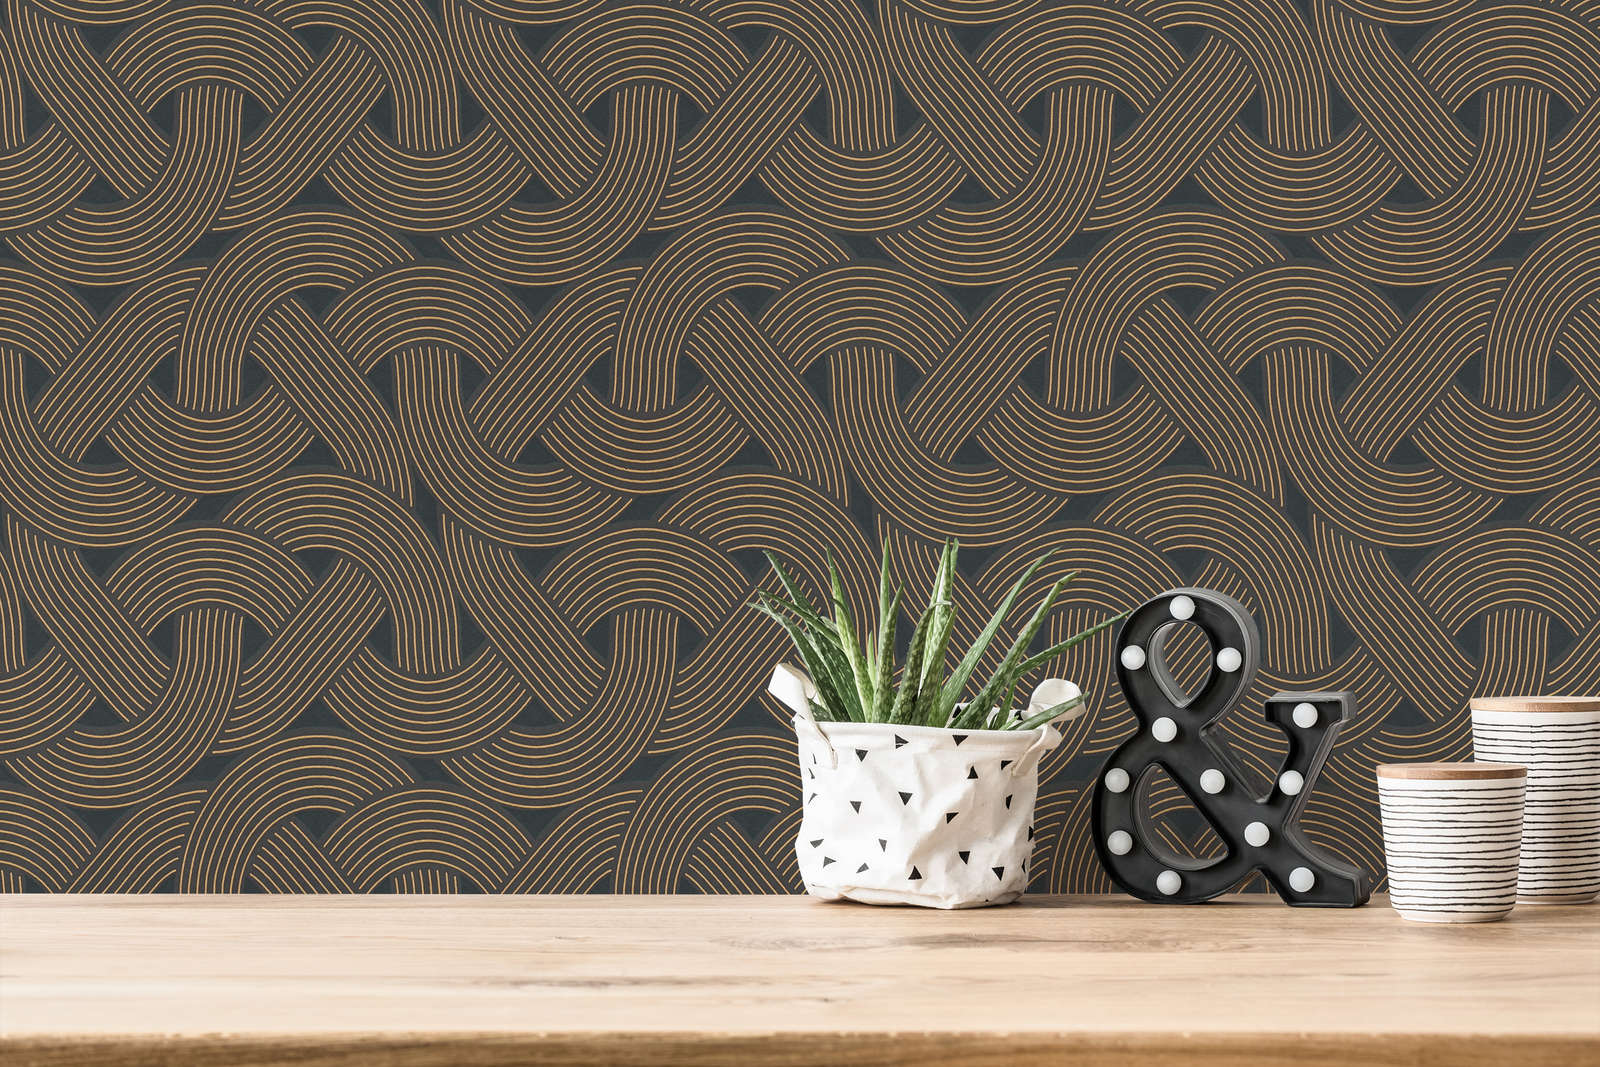             Non-woven wallpaper with line pattern in art deco style - black, gold
        